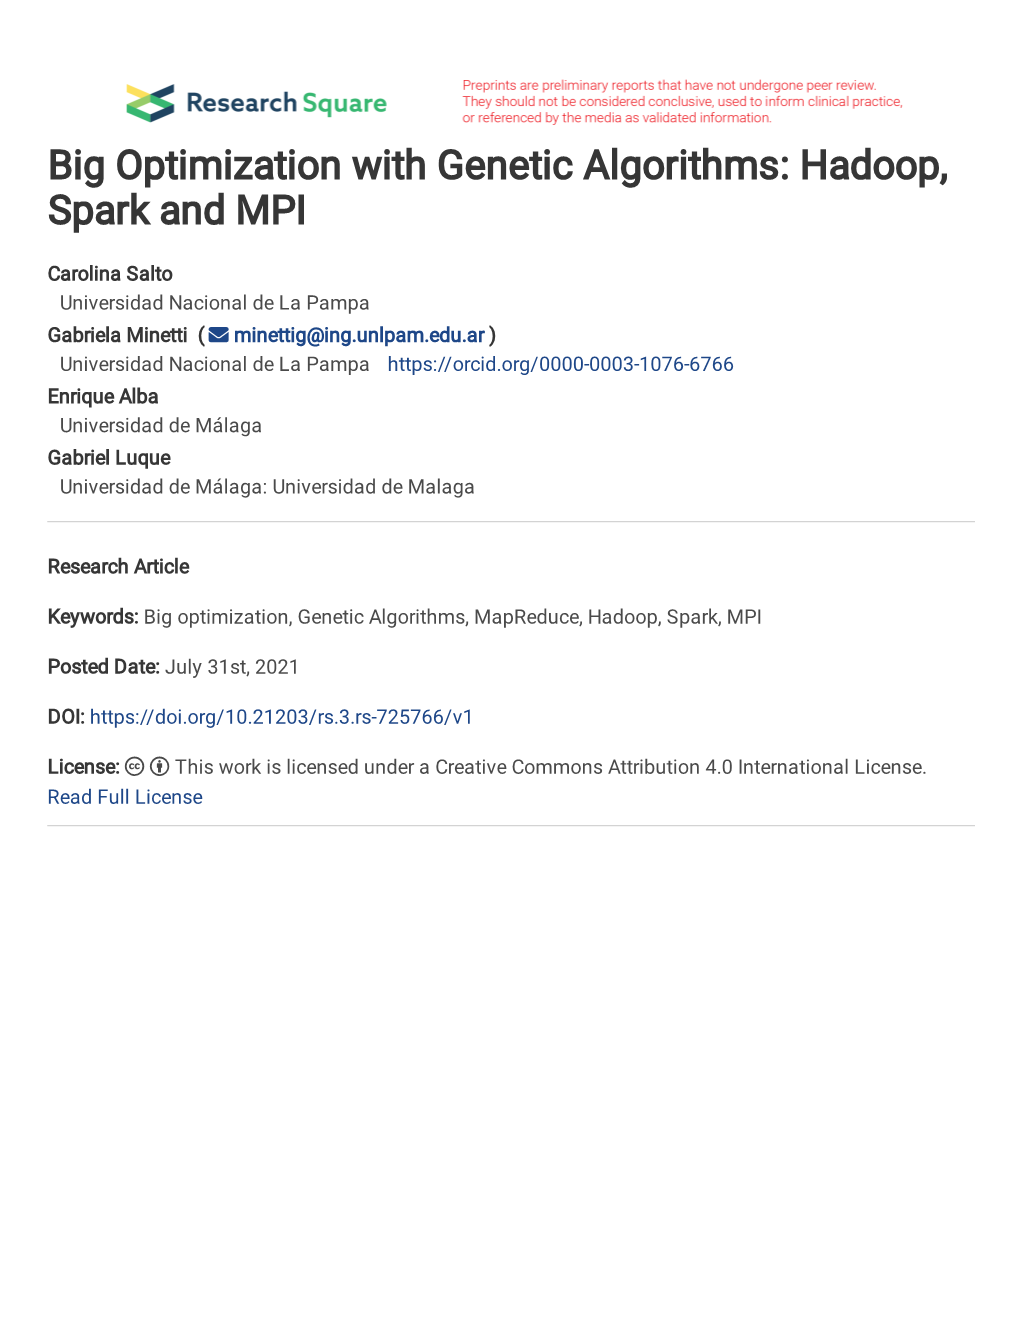 Hadoop, Spark and MPI